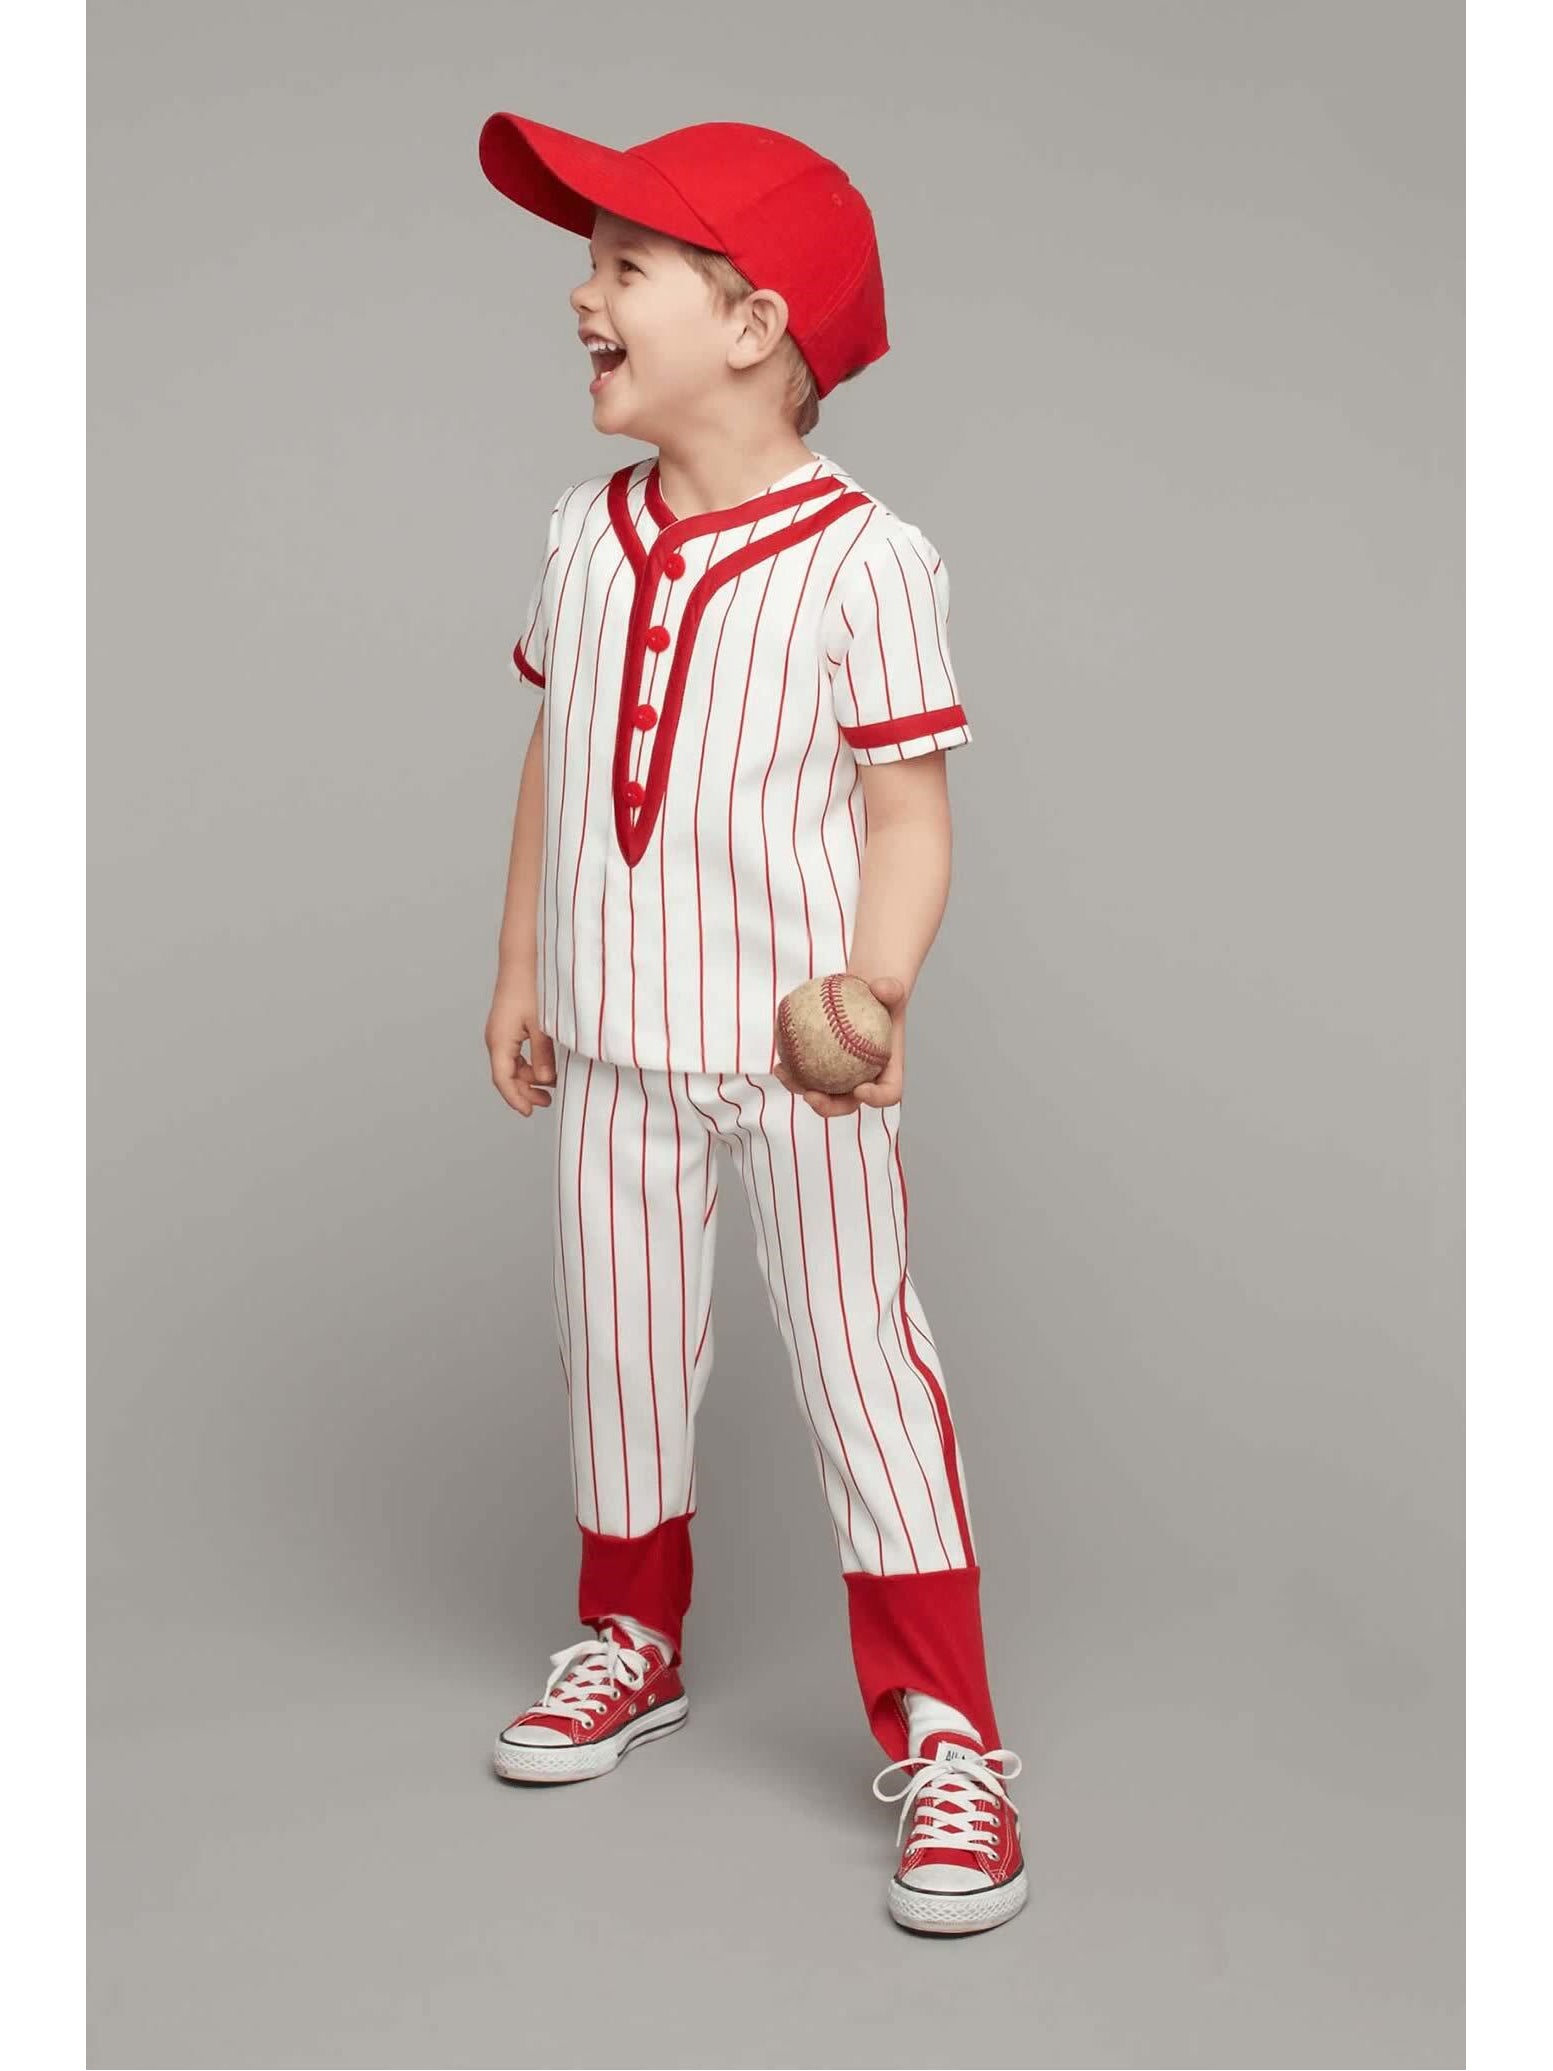 baseball uniforms for toddlers